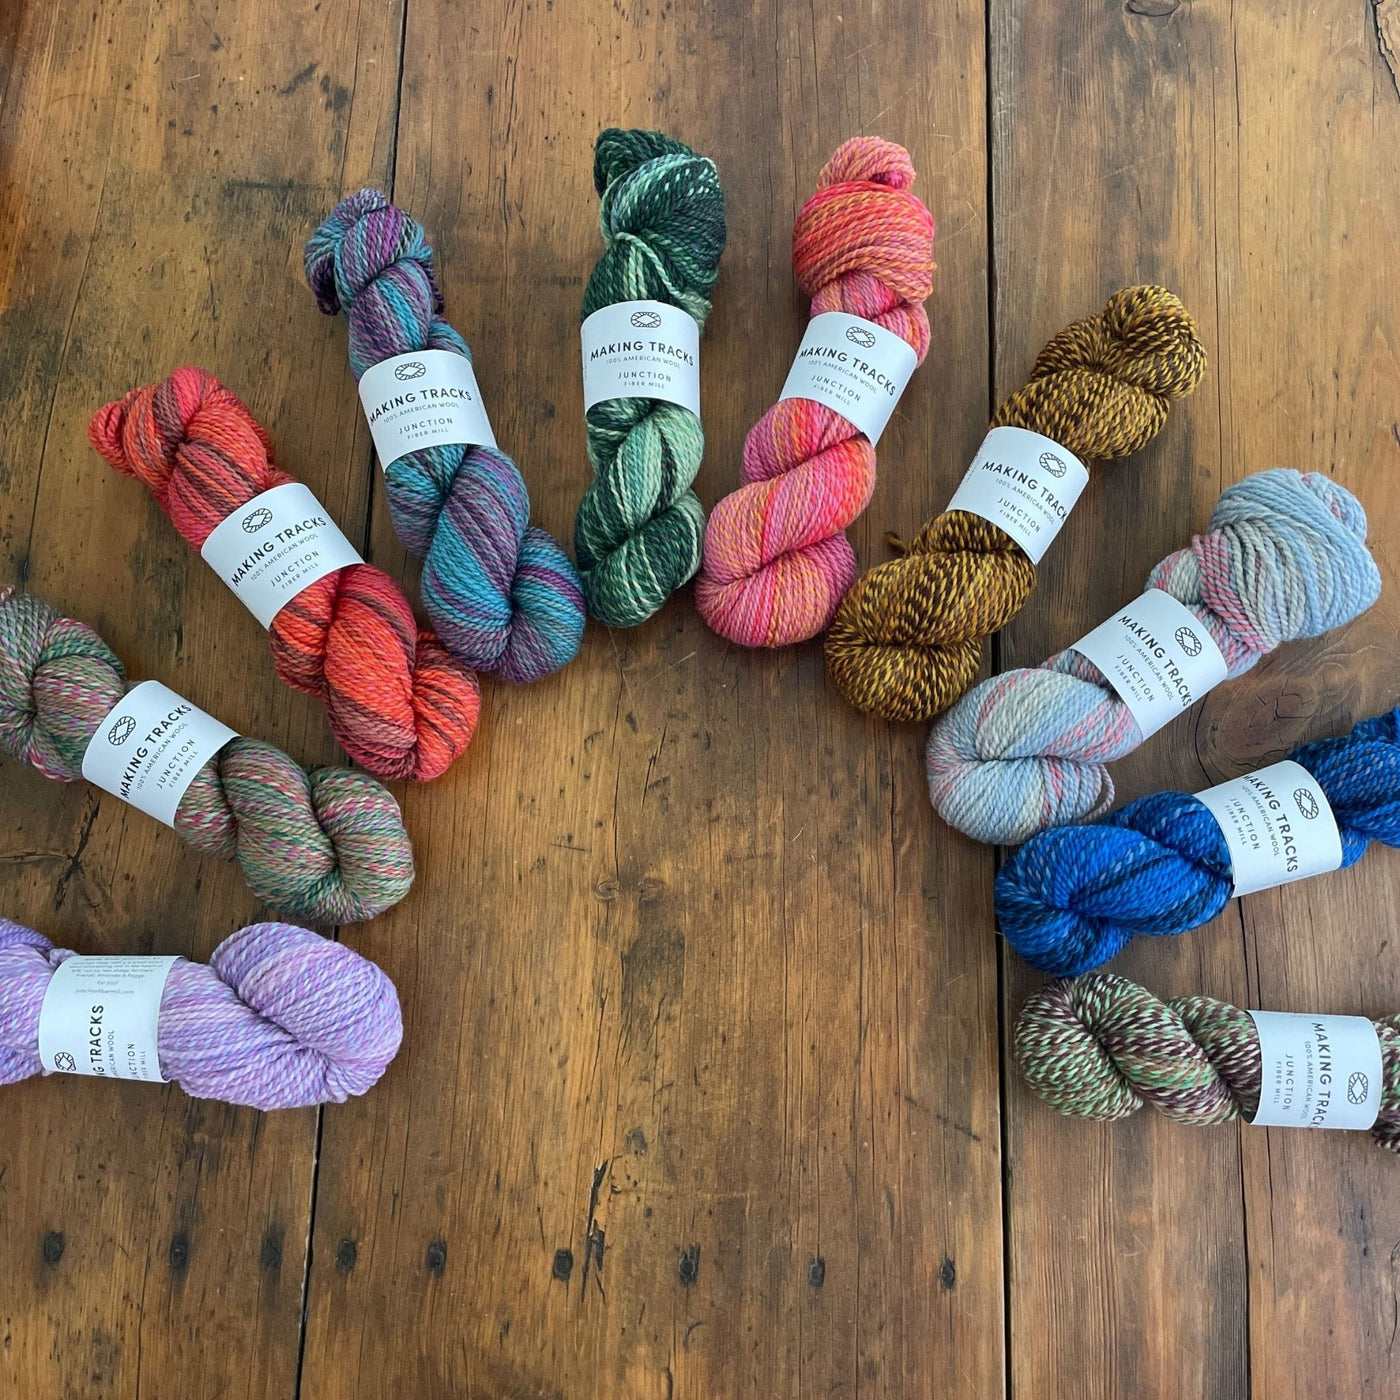 Ten skeins of Junction Fiber Mill Making Tracks yarn, a DK weight, barberpole yarn, in various colors, arrayed on a wooden table